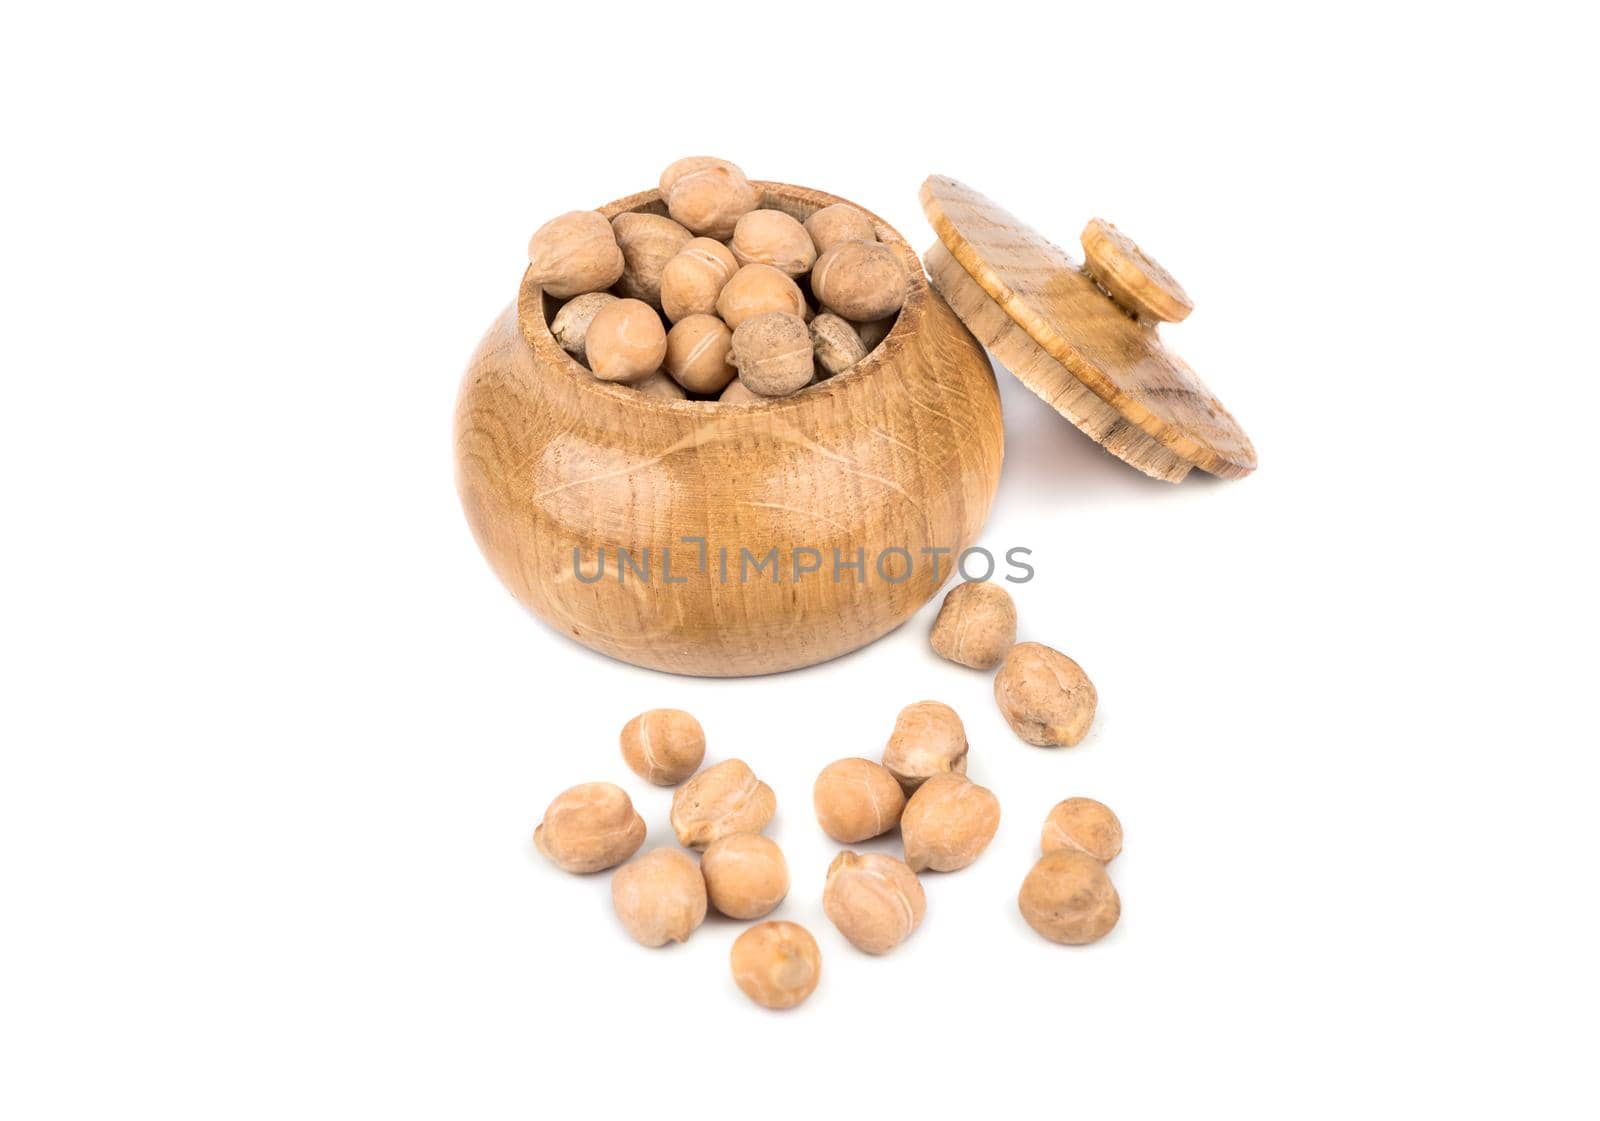 Dry chickpeas in a wooden capacitance on a white background